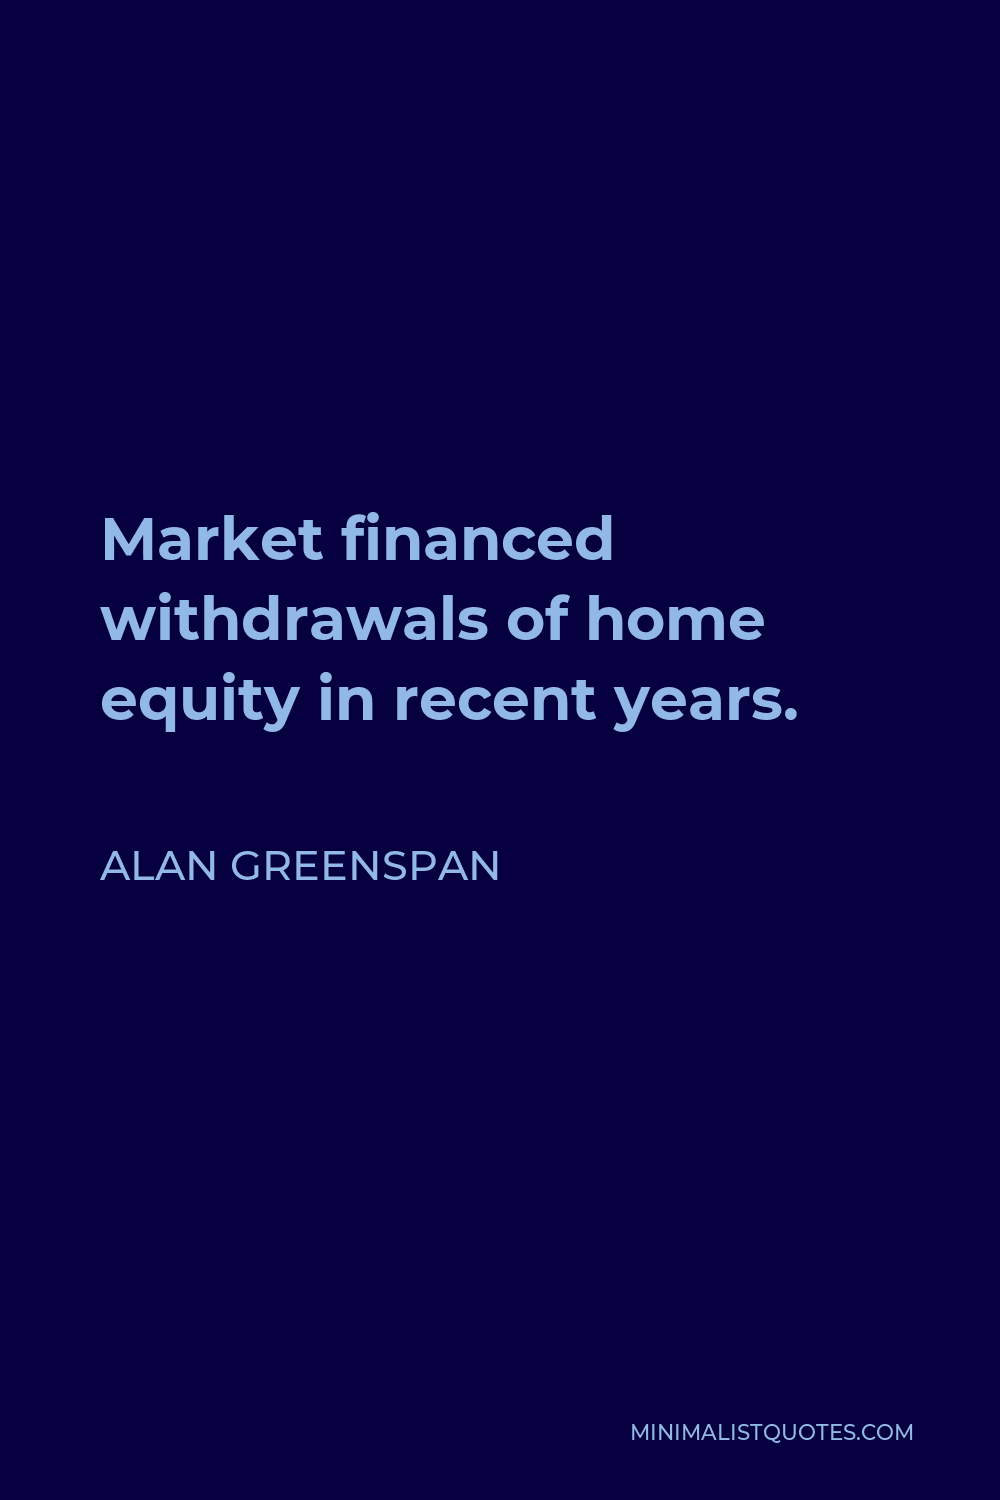 Alan Greenspan Quote - Market financed withdrawals of home equity in recent years.